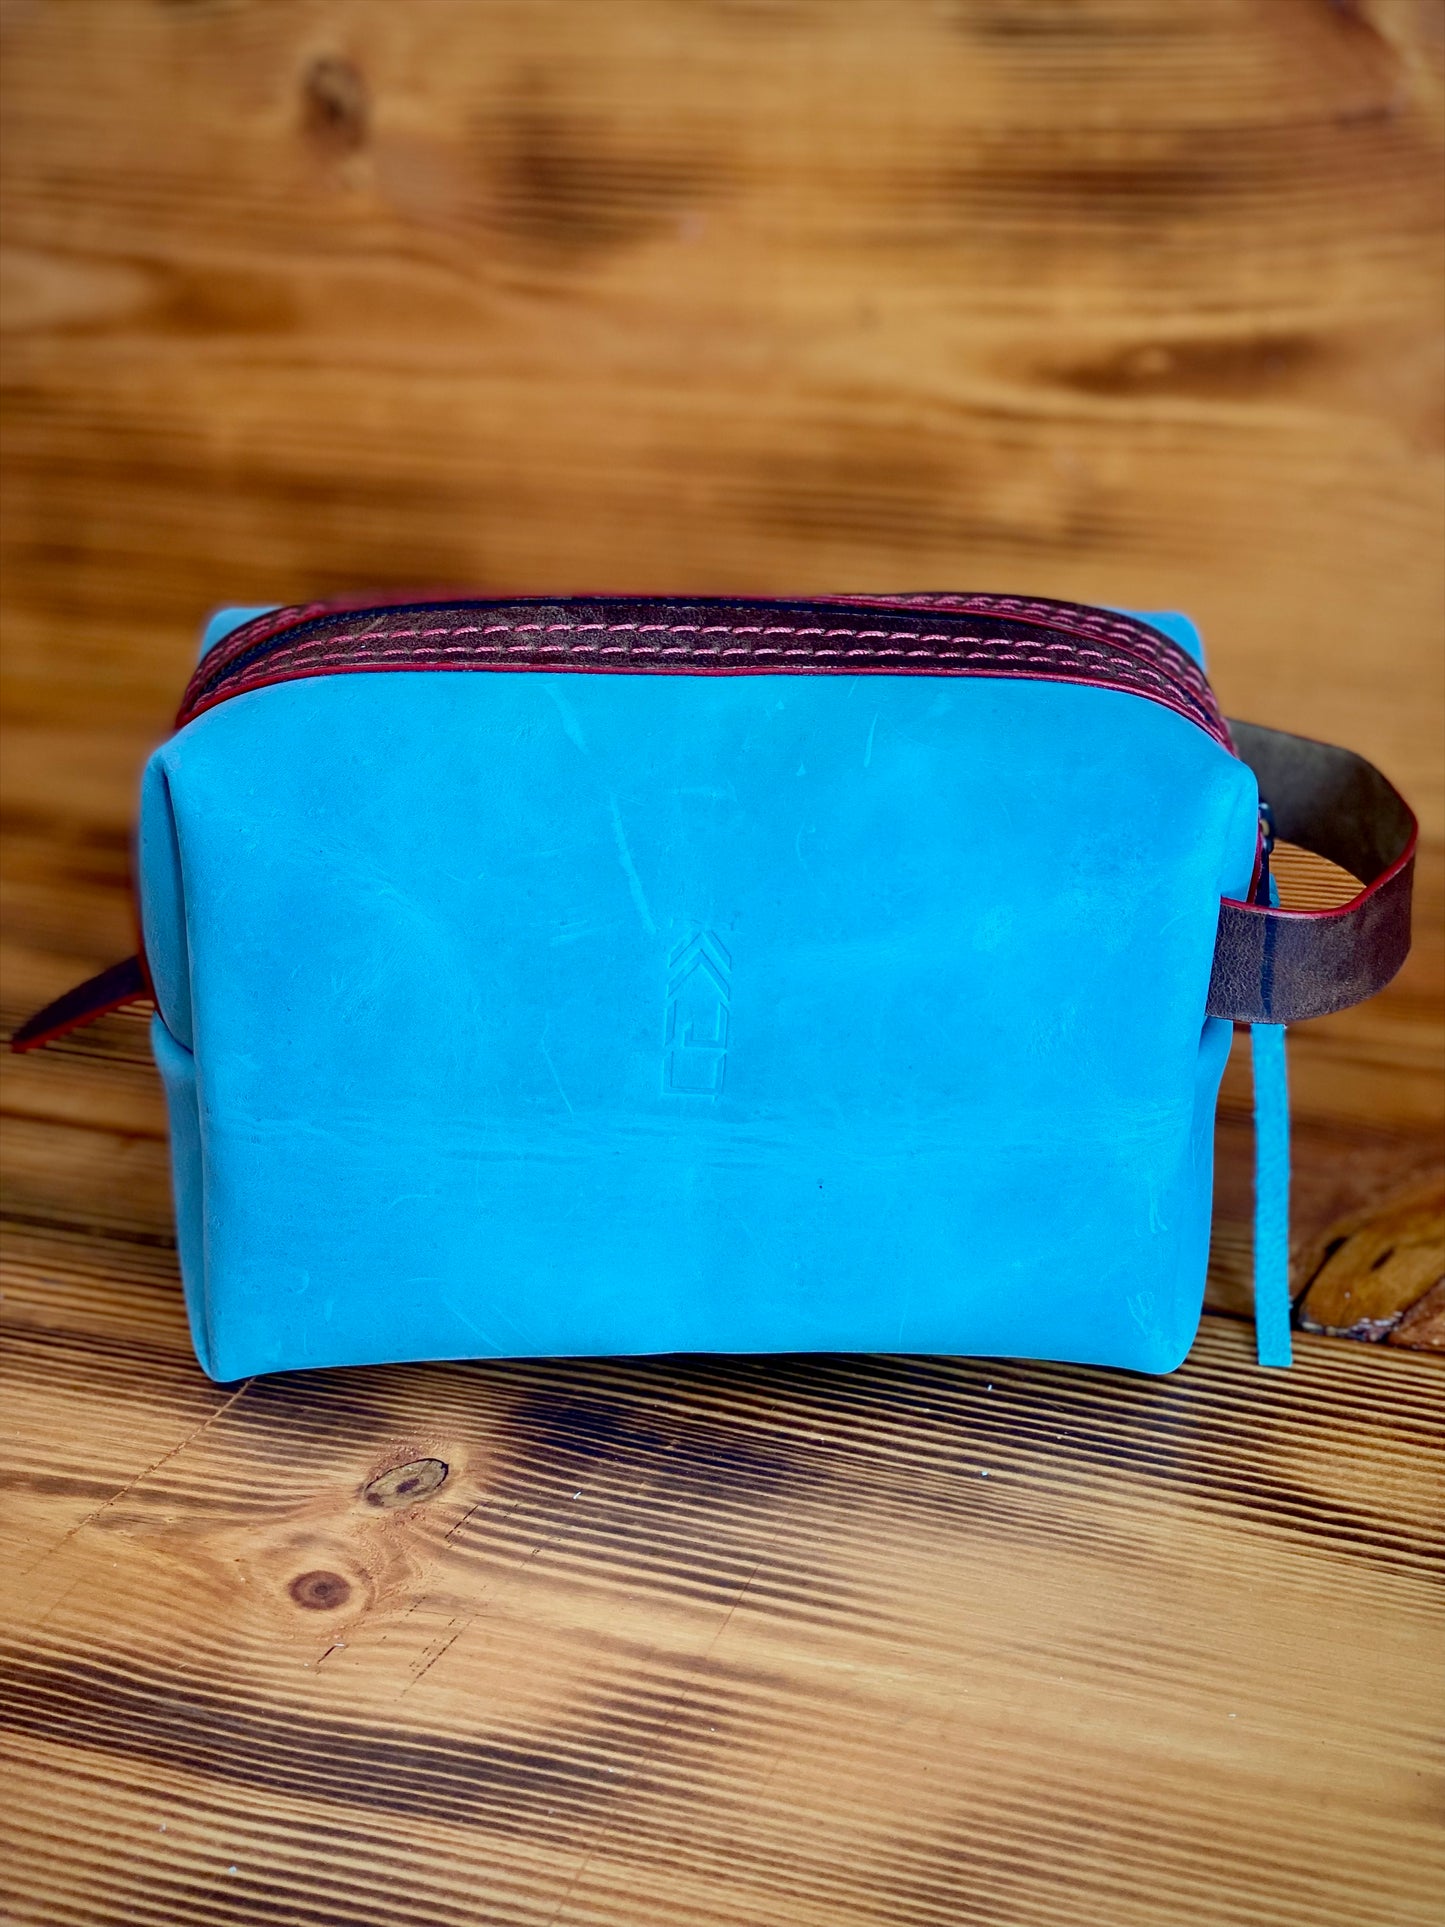 Kaiju Cut and Sew Baby Blue Horween Leather Dopp Kit with Japanese Fabric liner | Handmade in Austin, Texas